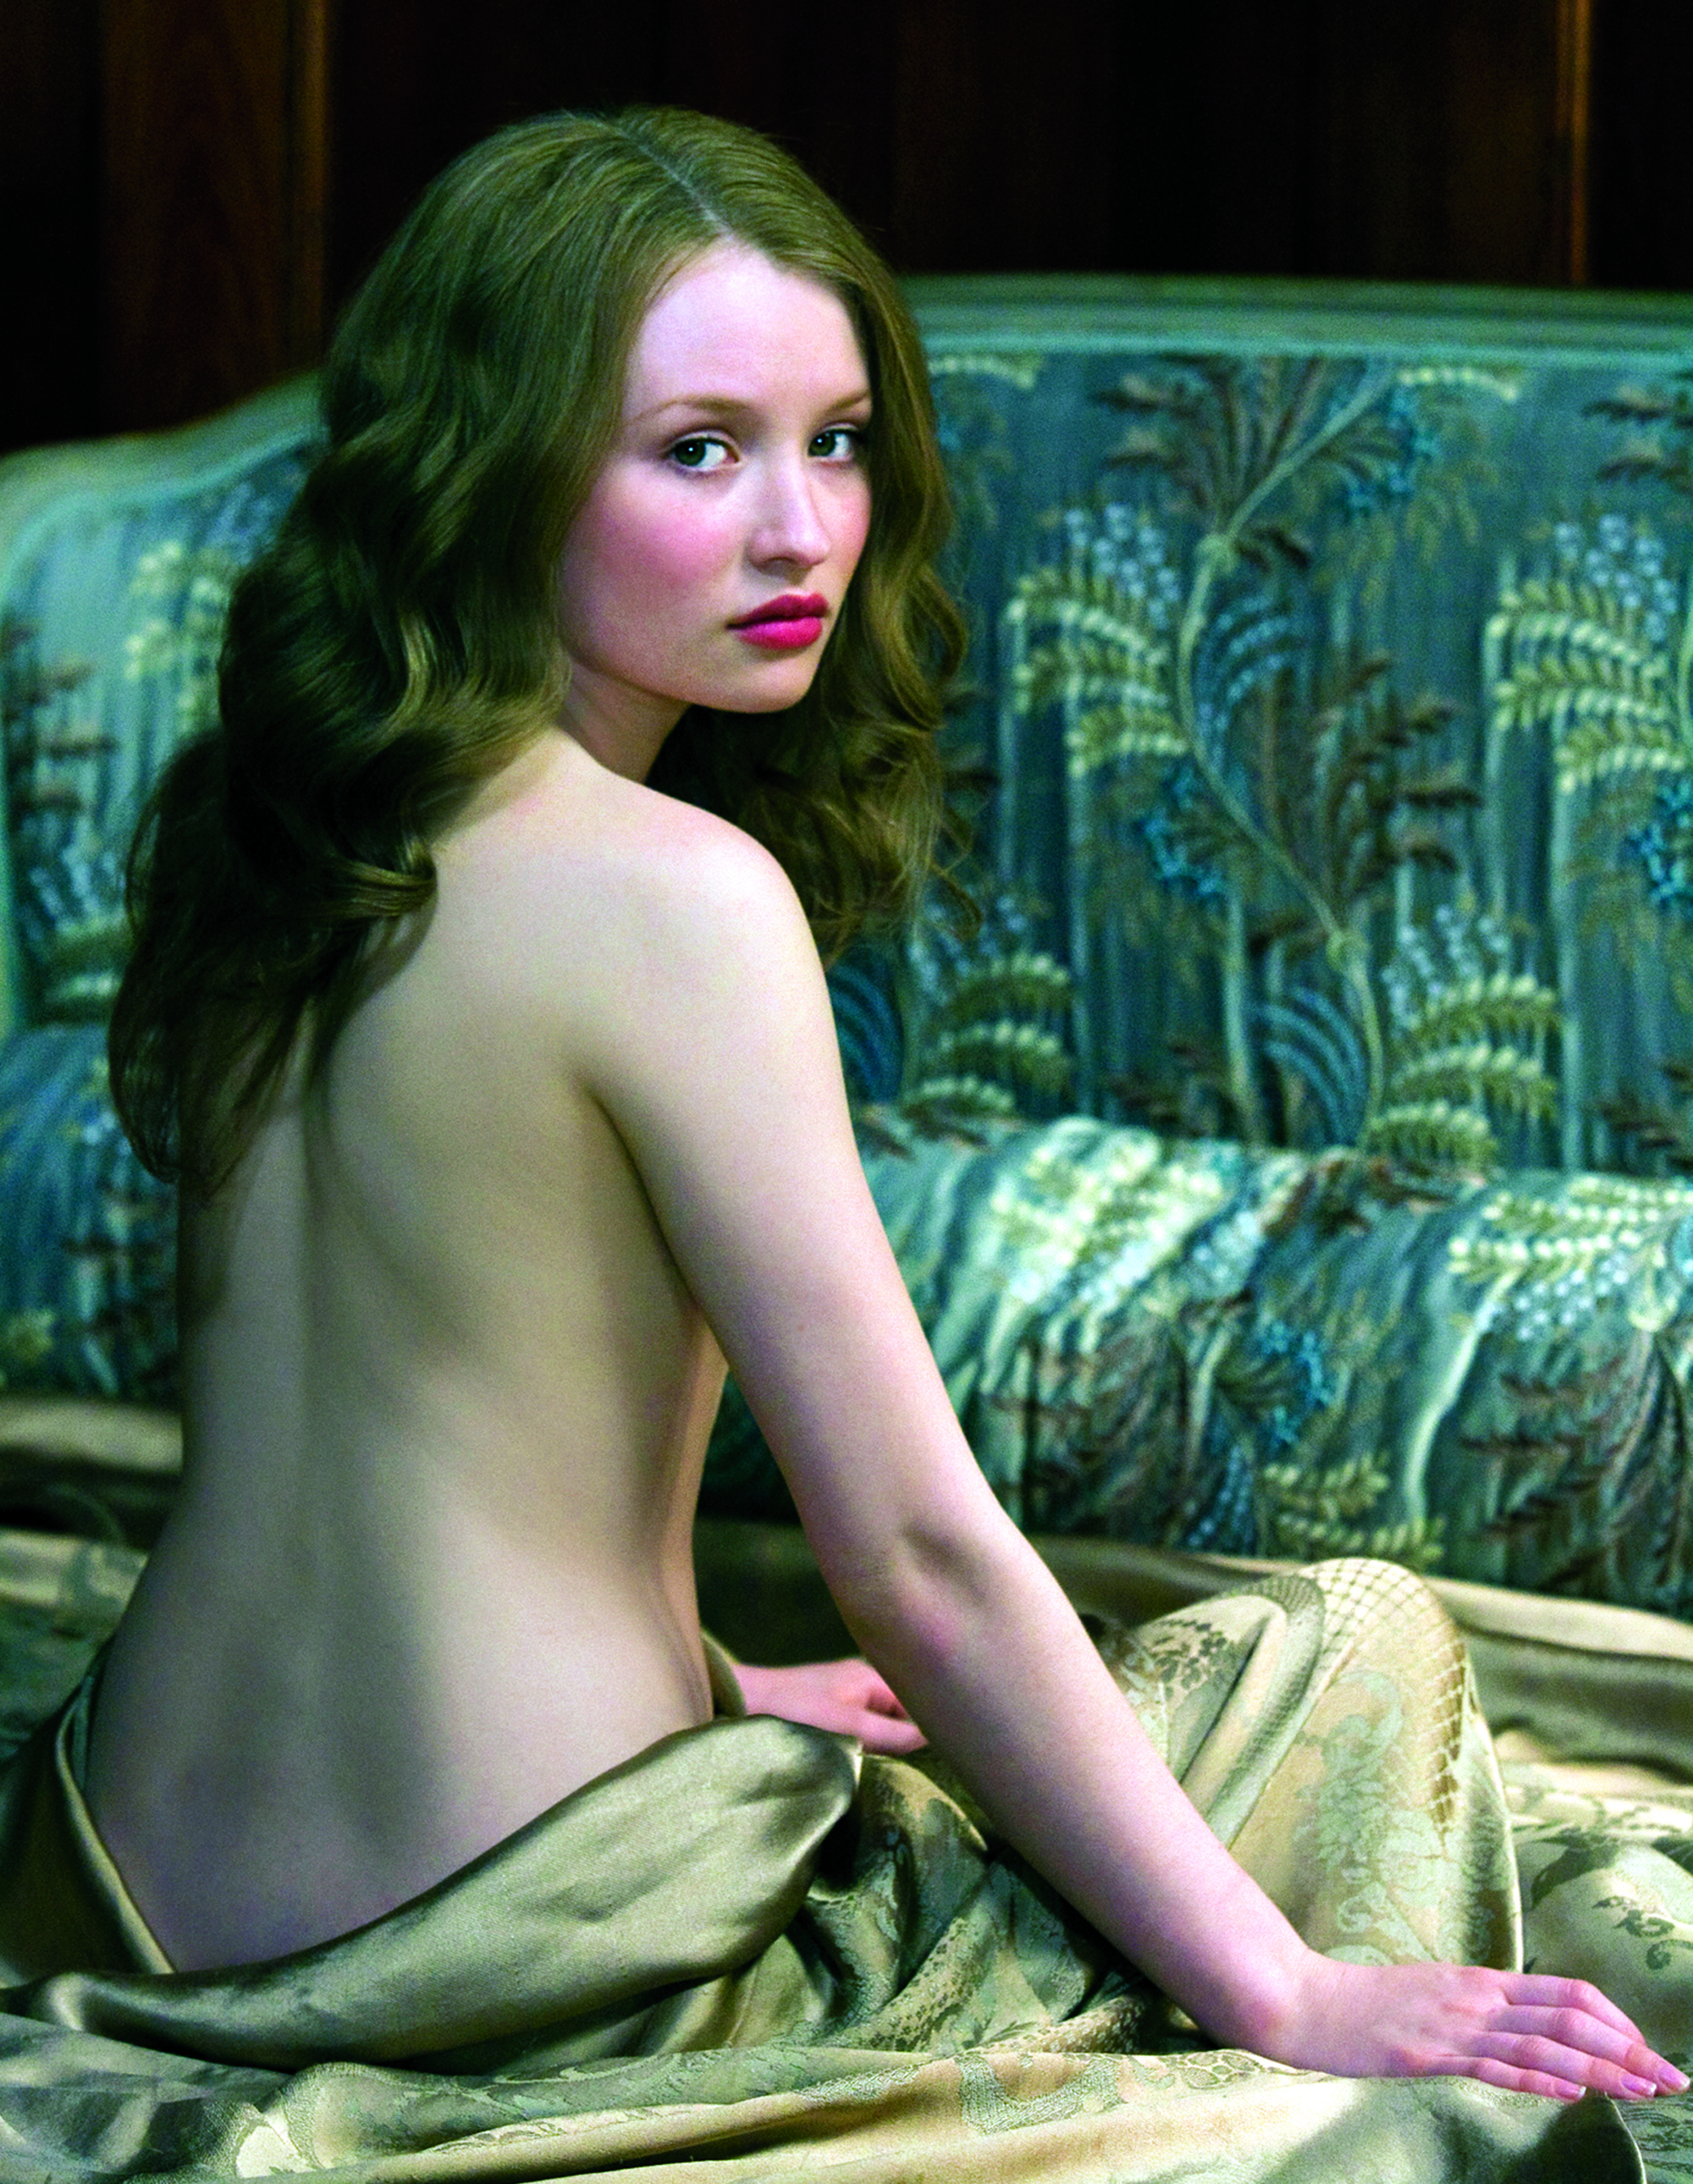 carla broussard share emily browning breasts photos